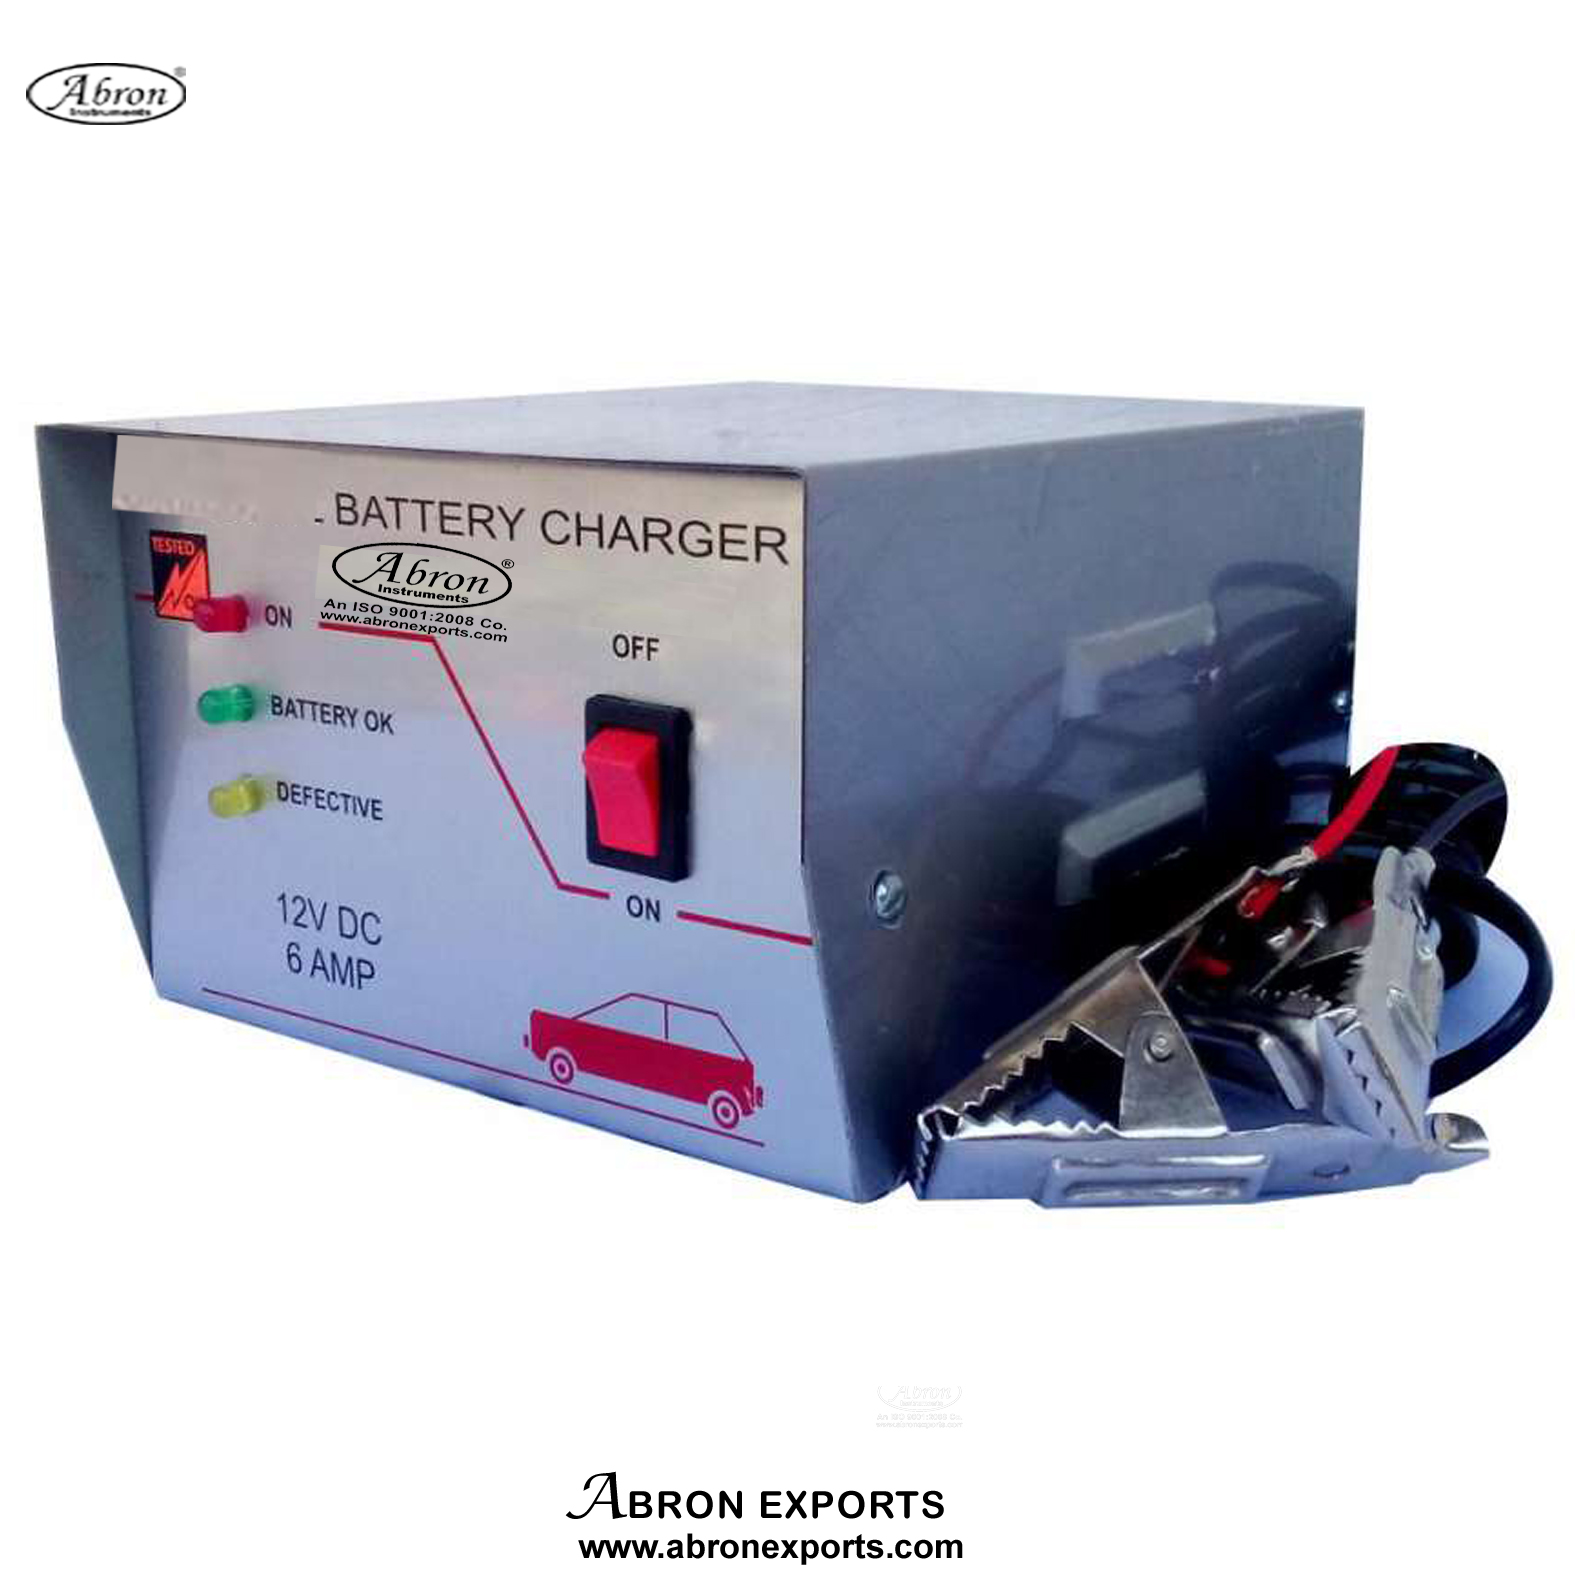 Battery Charger Automatic 0-12 Volt 5 Amp Adjusts Output as Per Battery Abron AE-1207A5 